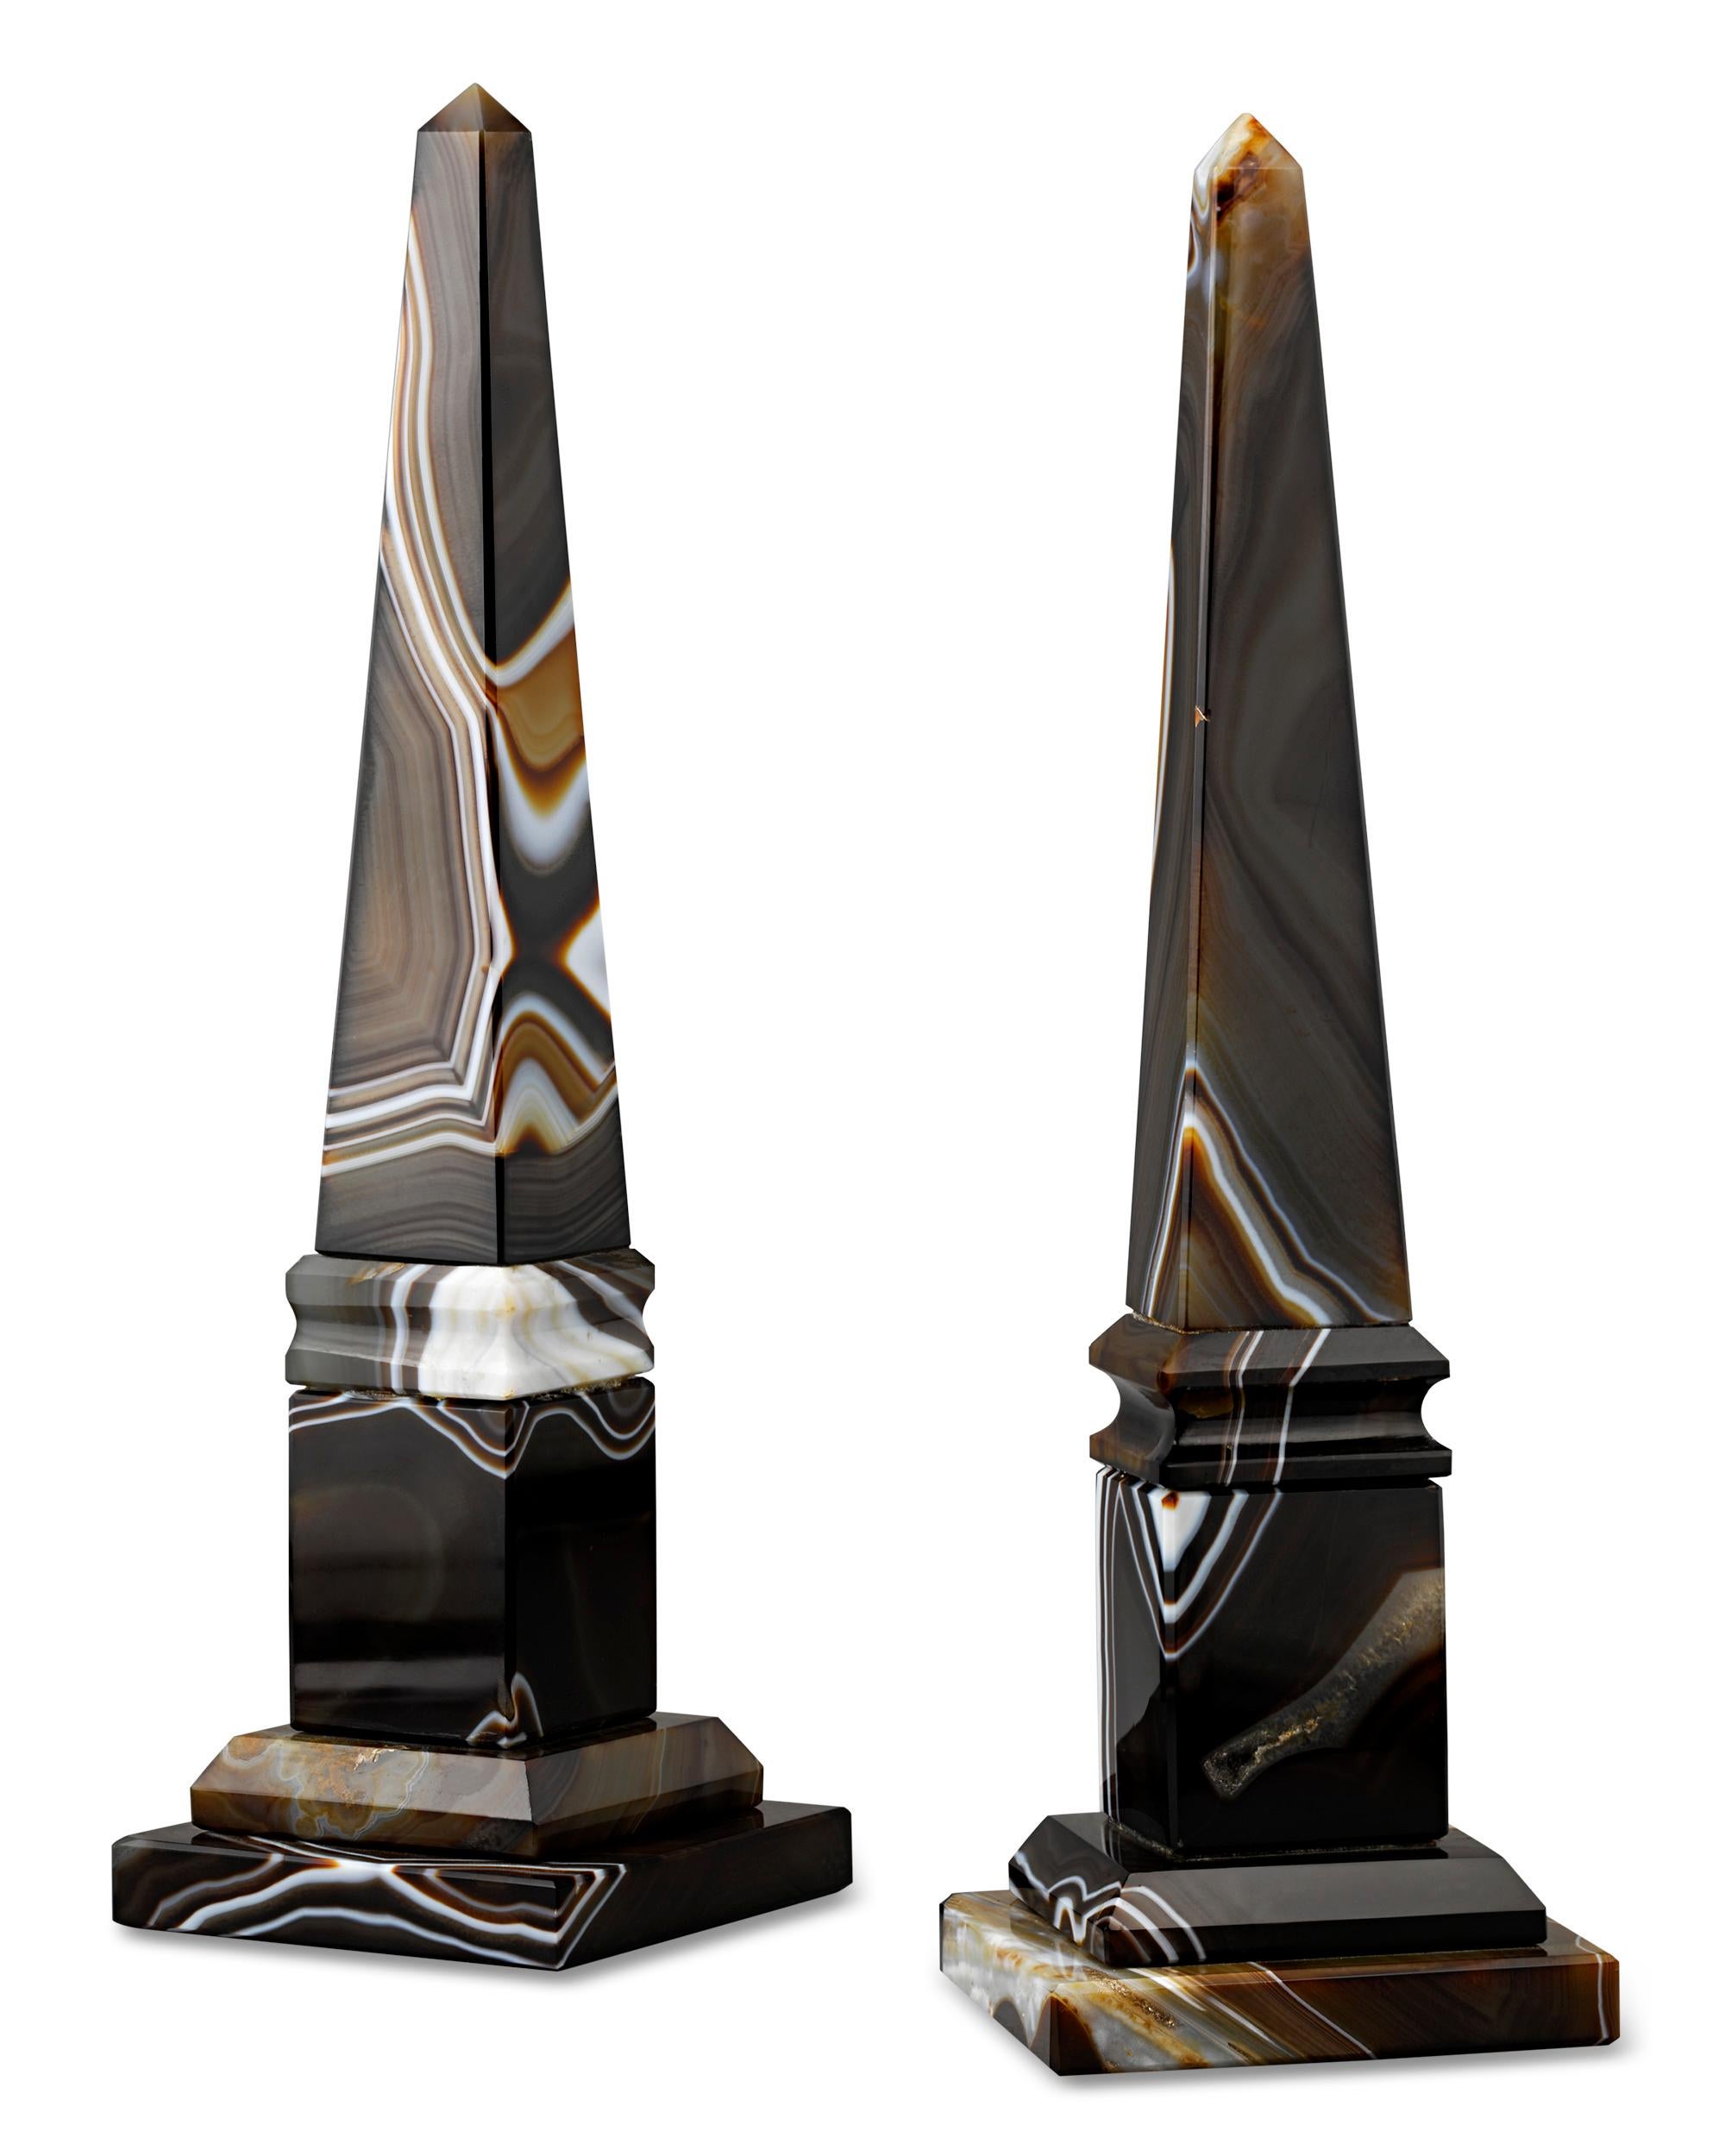 These impressive Egyptian Revival obelisks are crafted of dynamically patterned agate. The rare 19th-century models were almost certainly made in Italy during the height of the Grand Tour when the fervor for all things ancient pervaded the